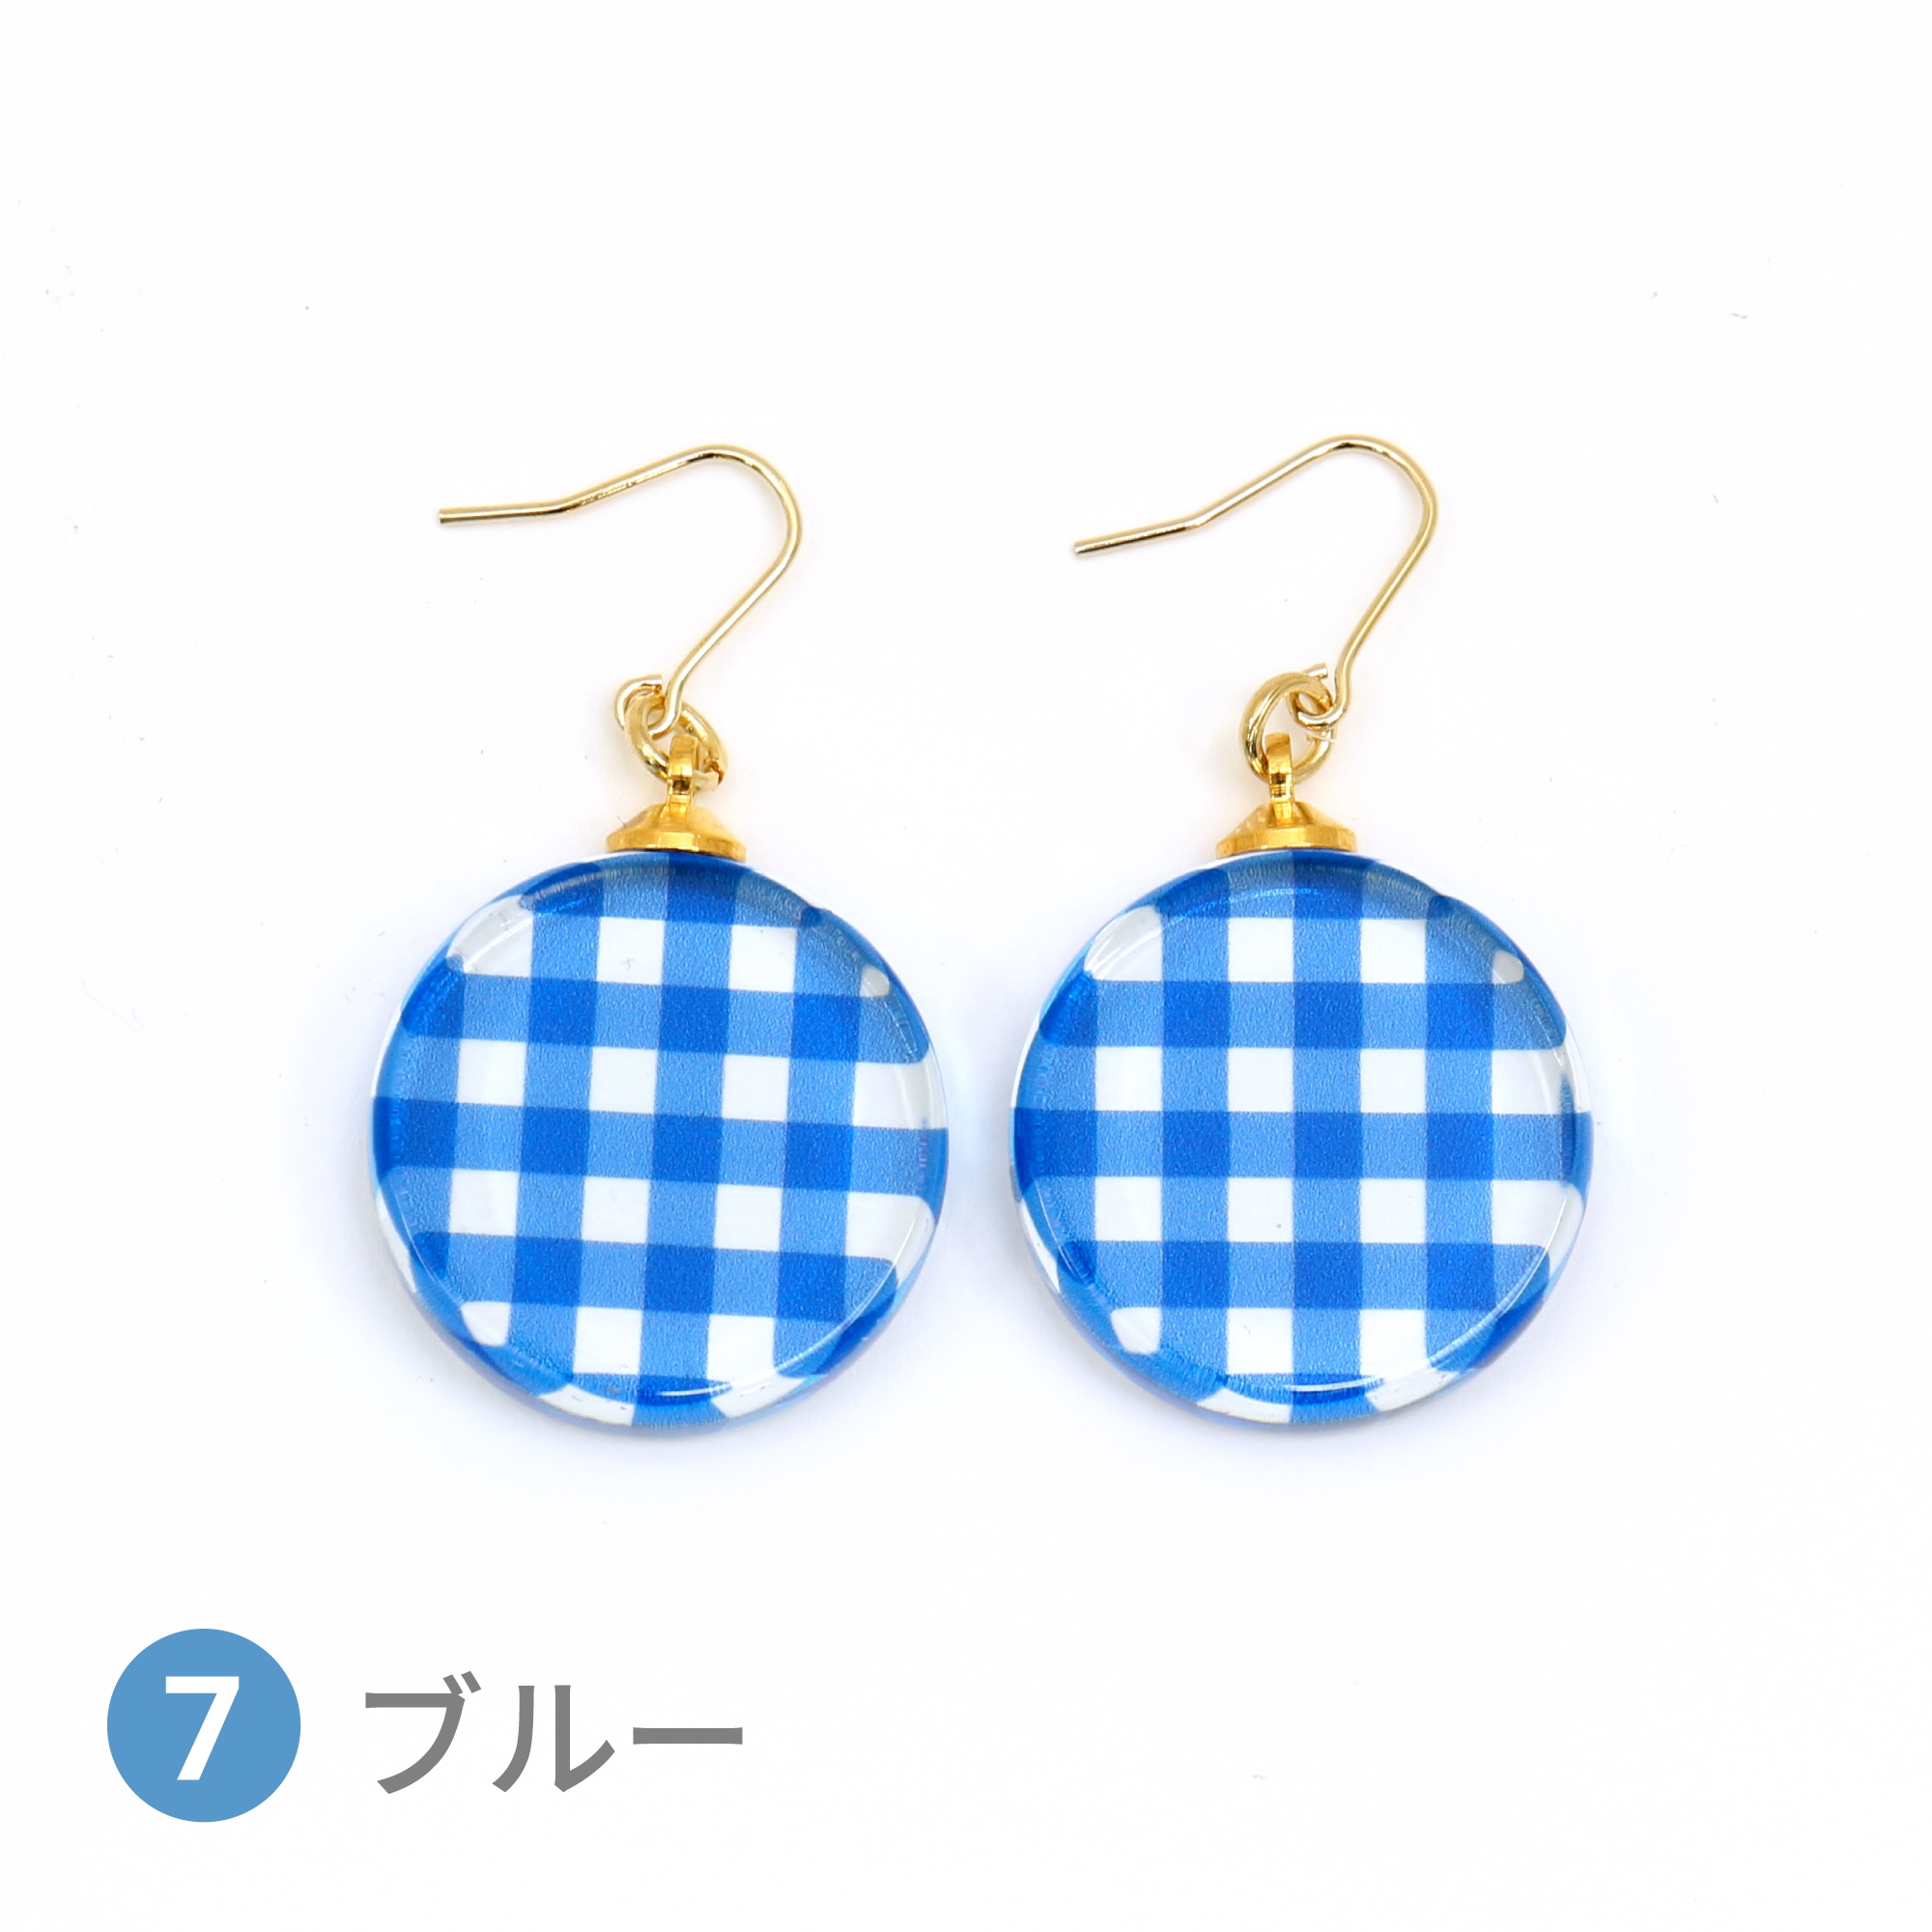 Glass accessories Pierced Earring GINGHAM CHECK blue round shape